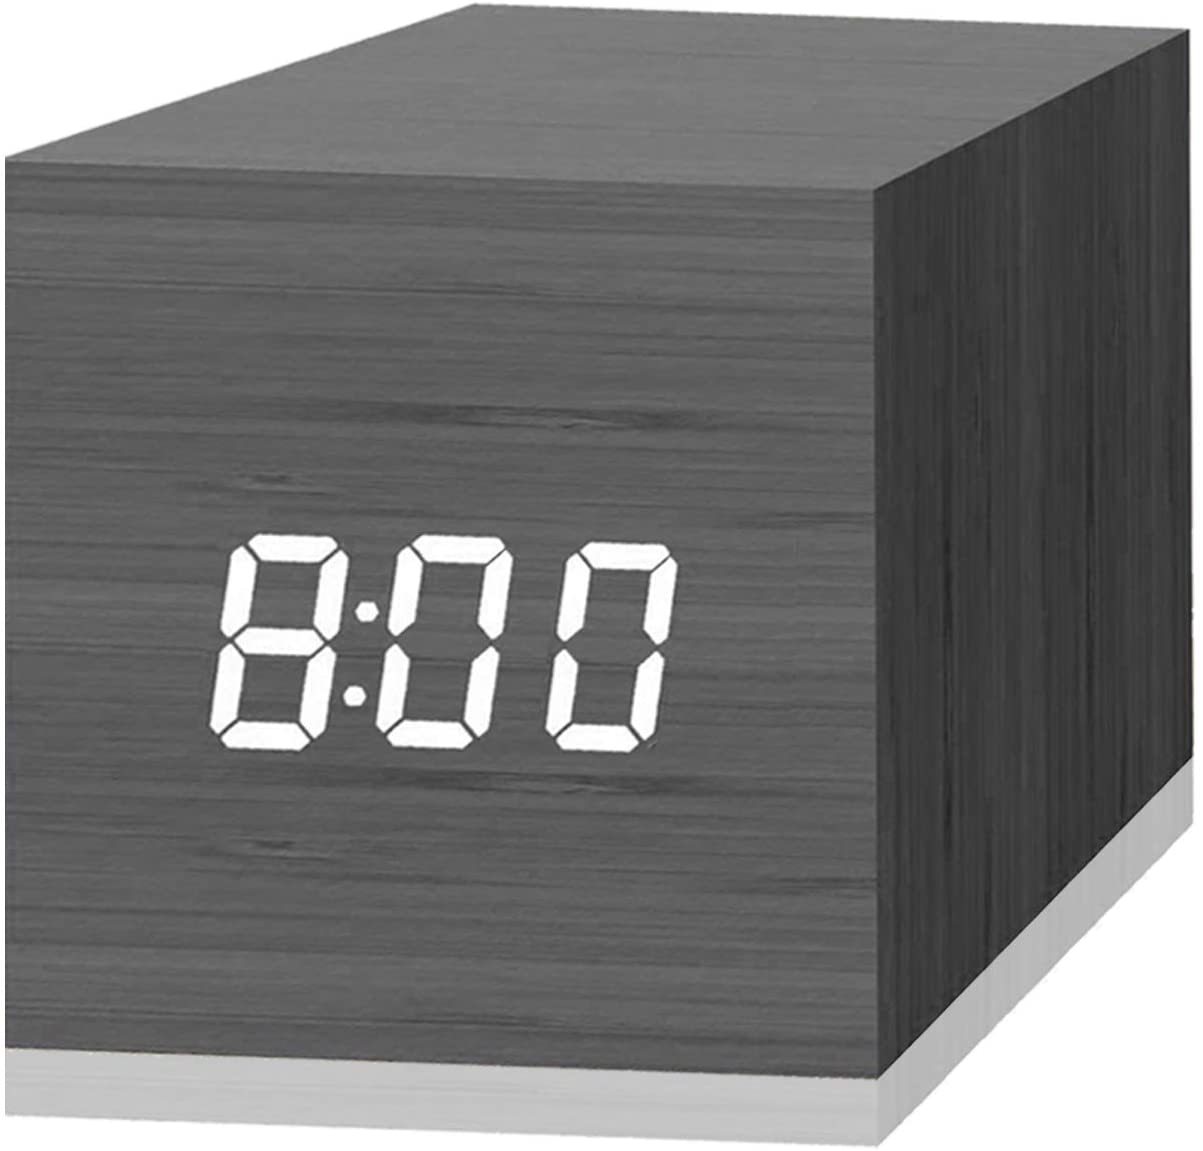 Digital Alarm Clock with Wooden Electronic LED Time Display Cube Design